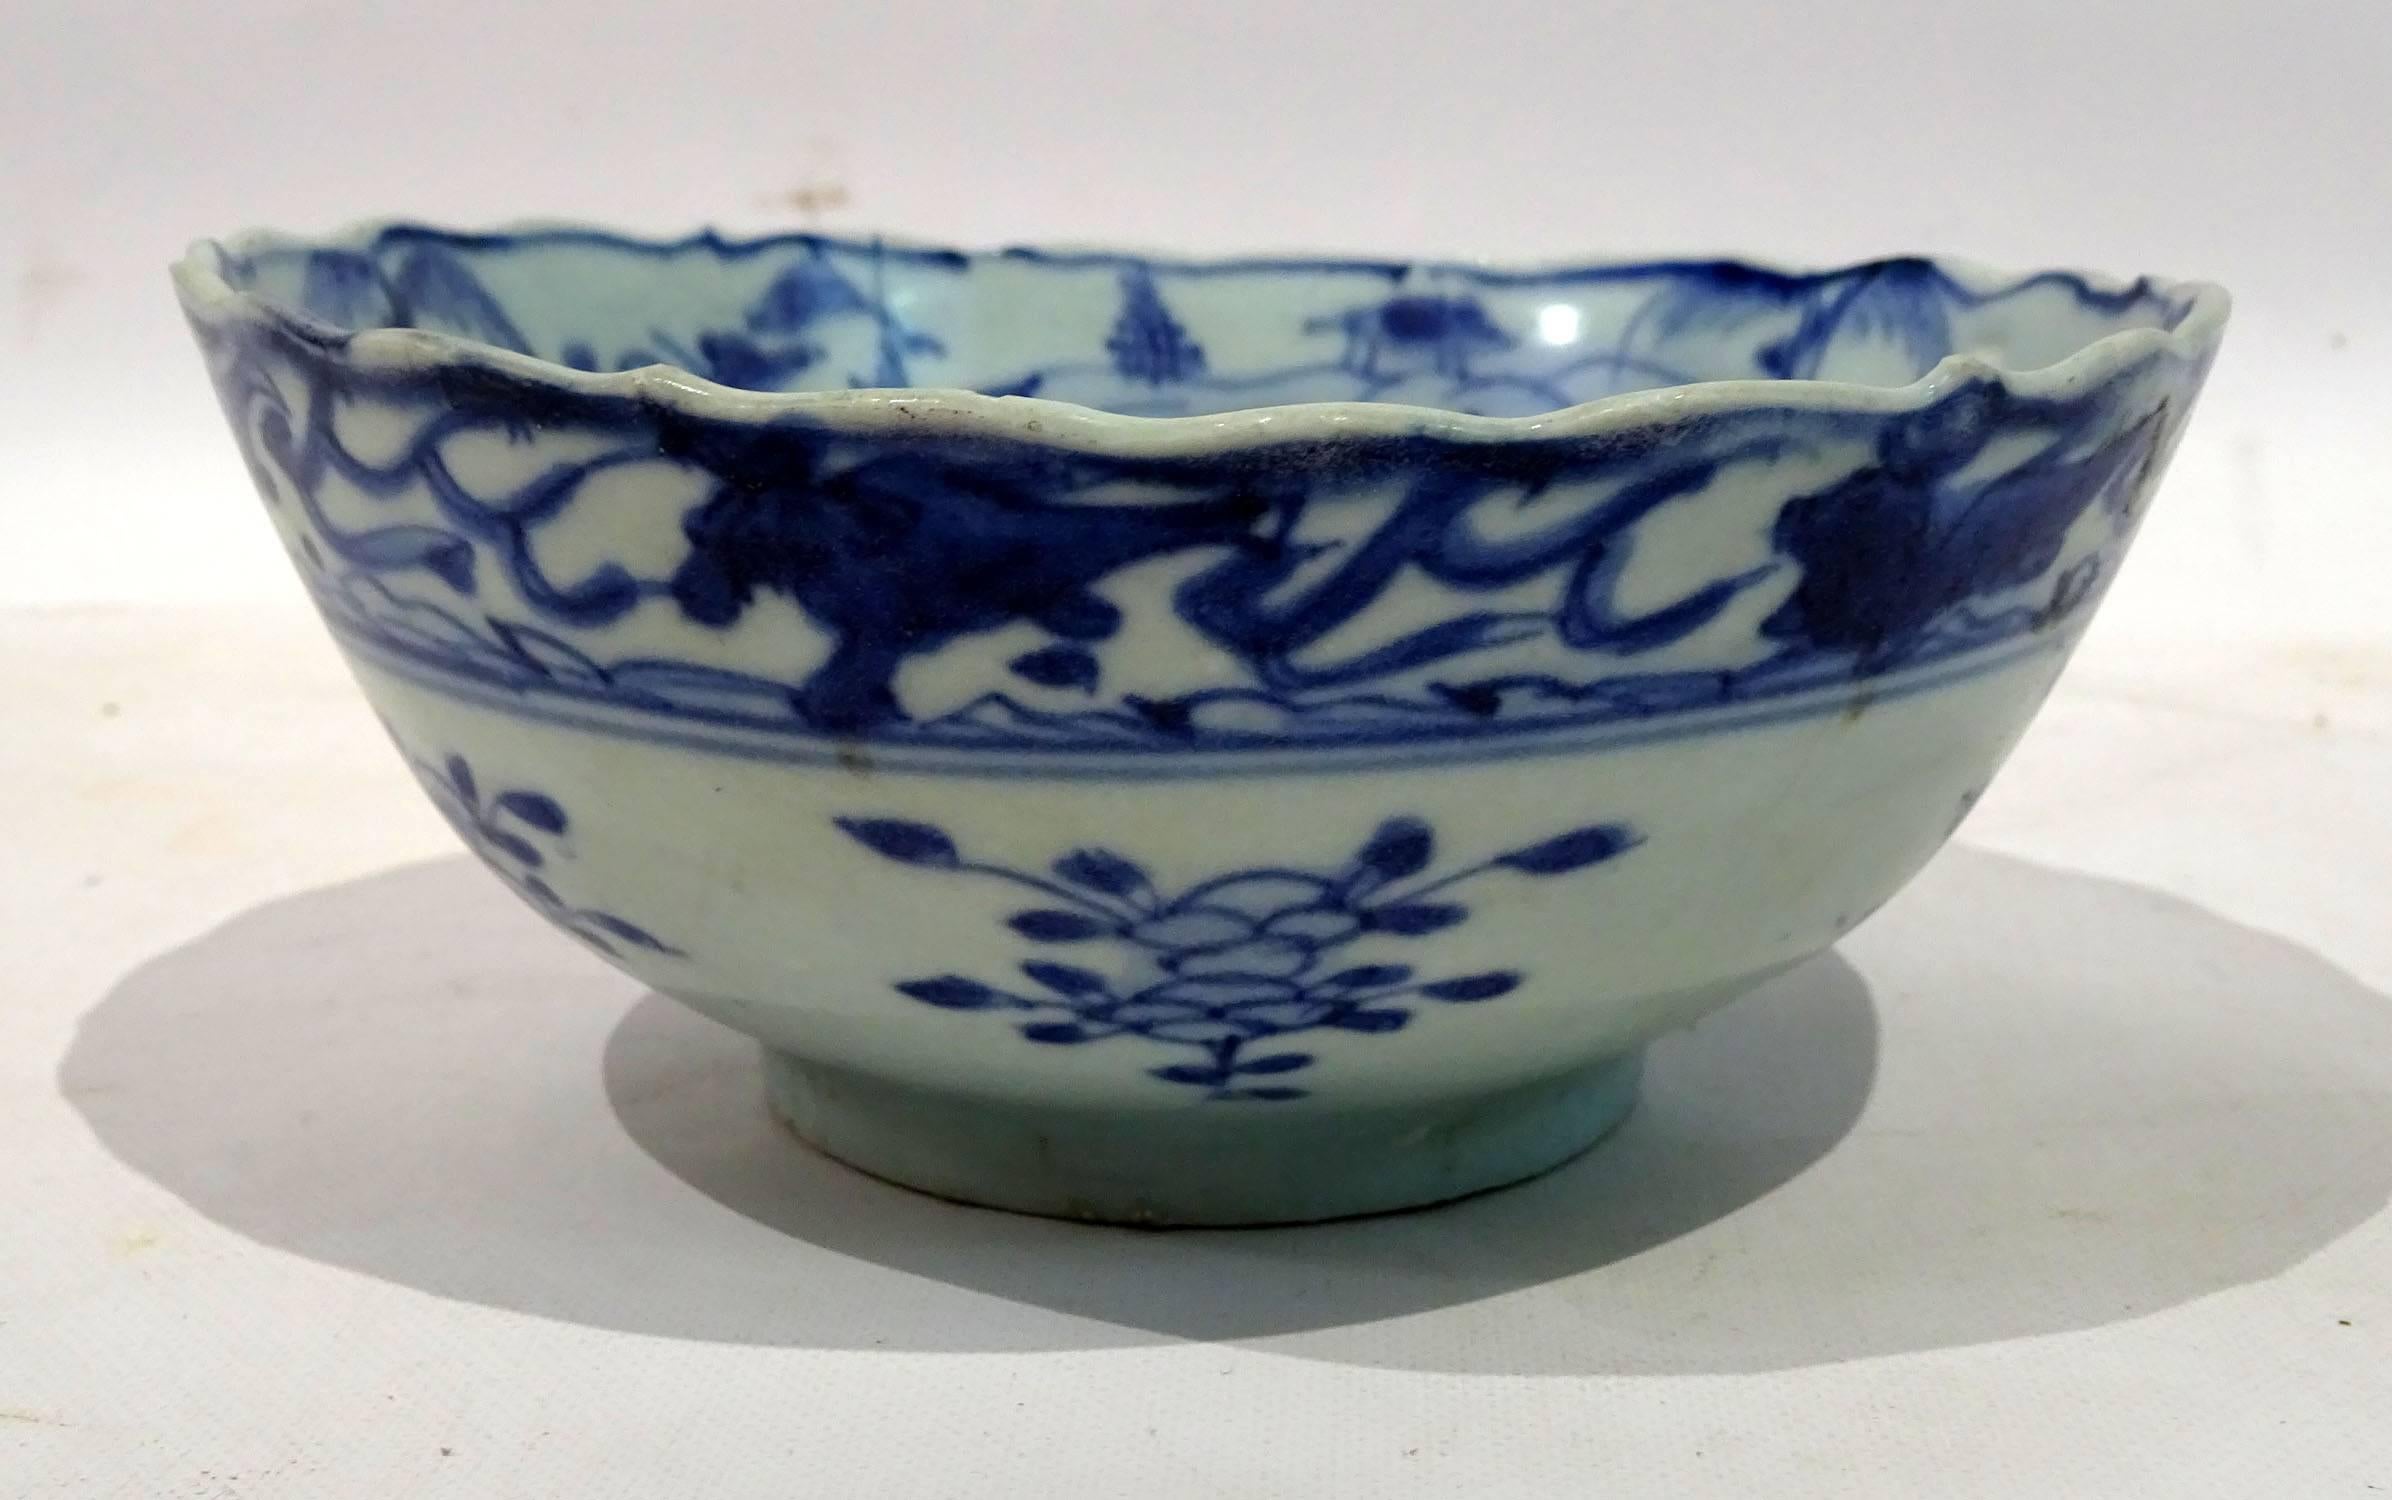 Hand-Painted 17th Century Chinese Blue and White Porcelain Bowl from The Hatcher Collection